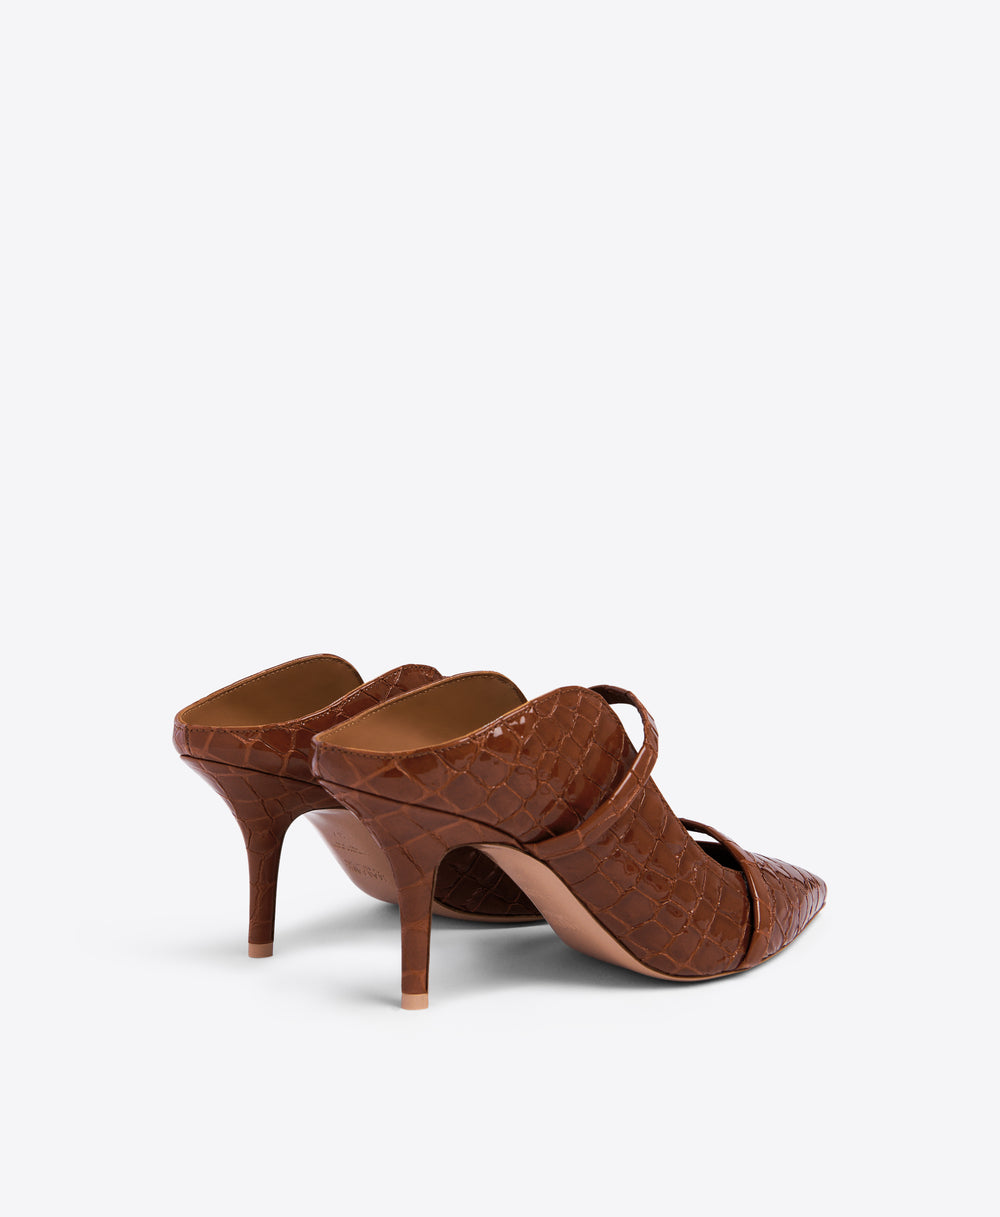 Double Strap Brown Embossed Patent Stiletto Mules - Pointed Toe | Malone Souliers